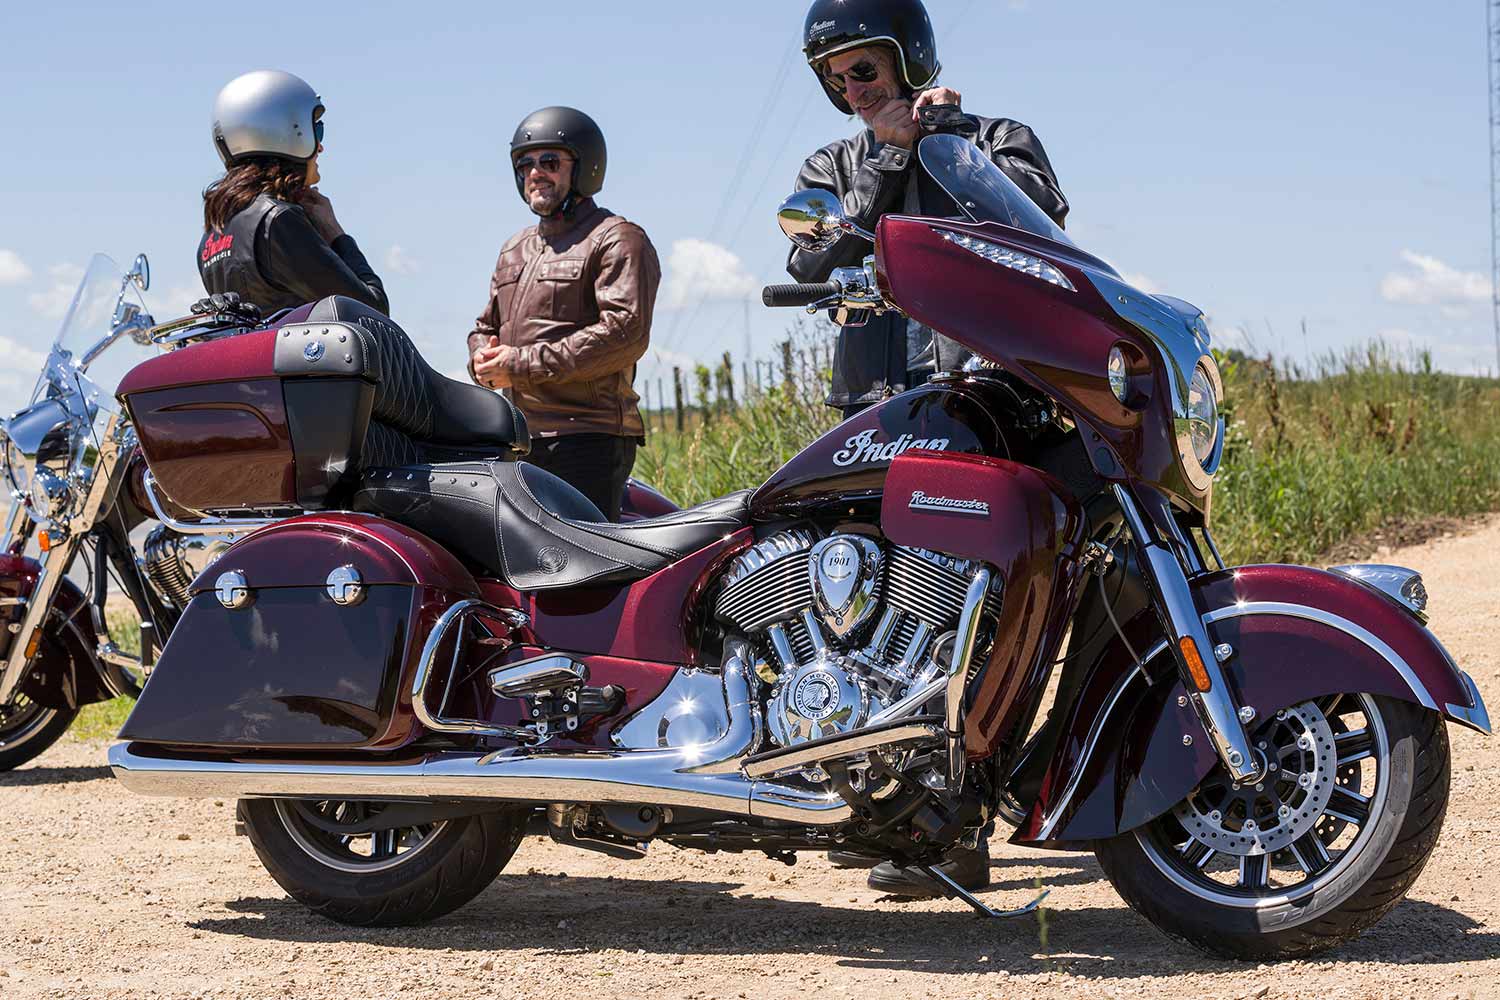 2021 Indian Roadmaster Buyers Guide Specs, Photos, Price Cycle World